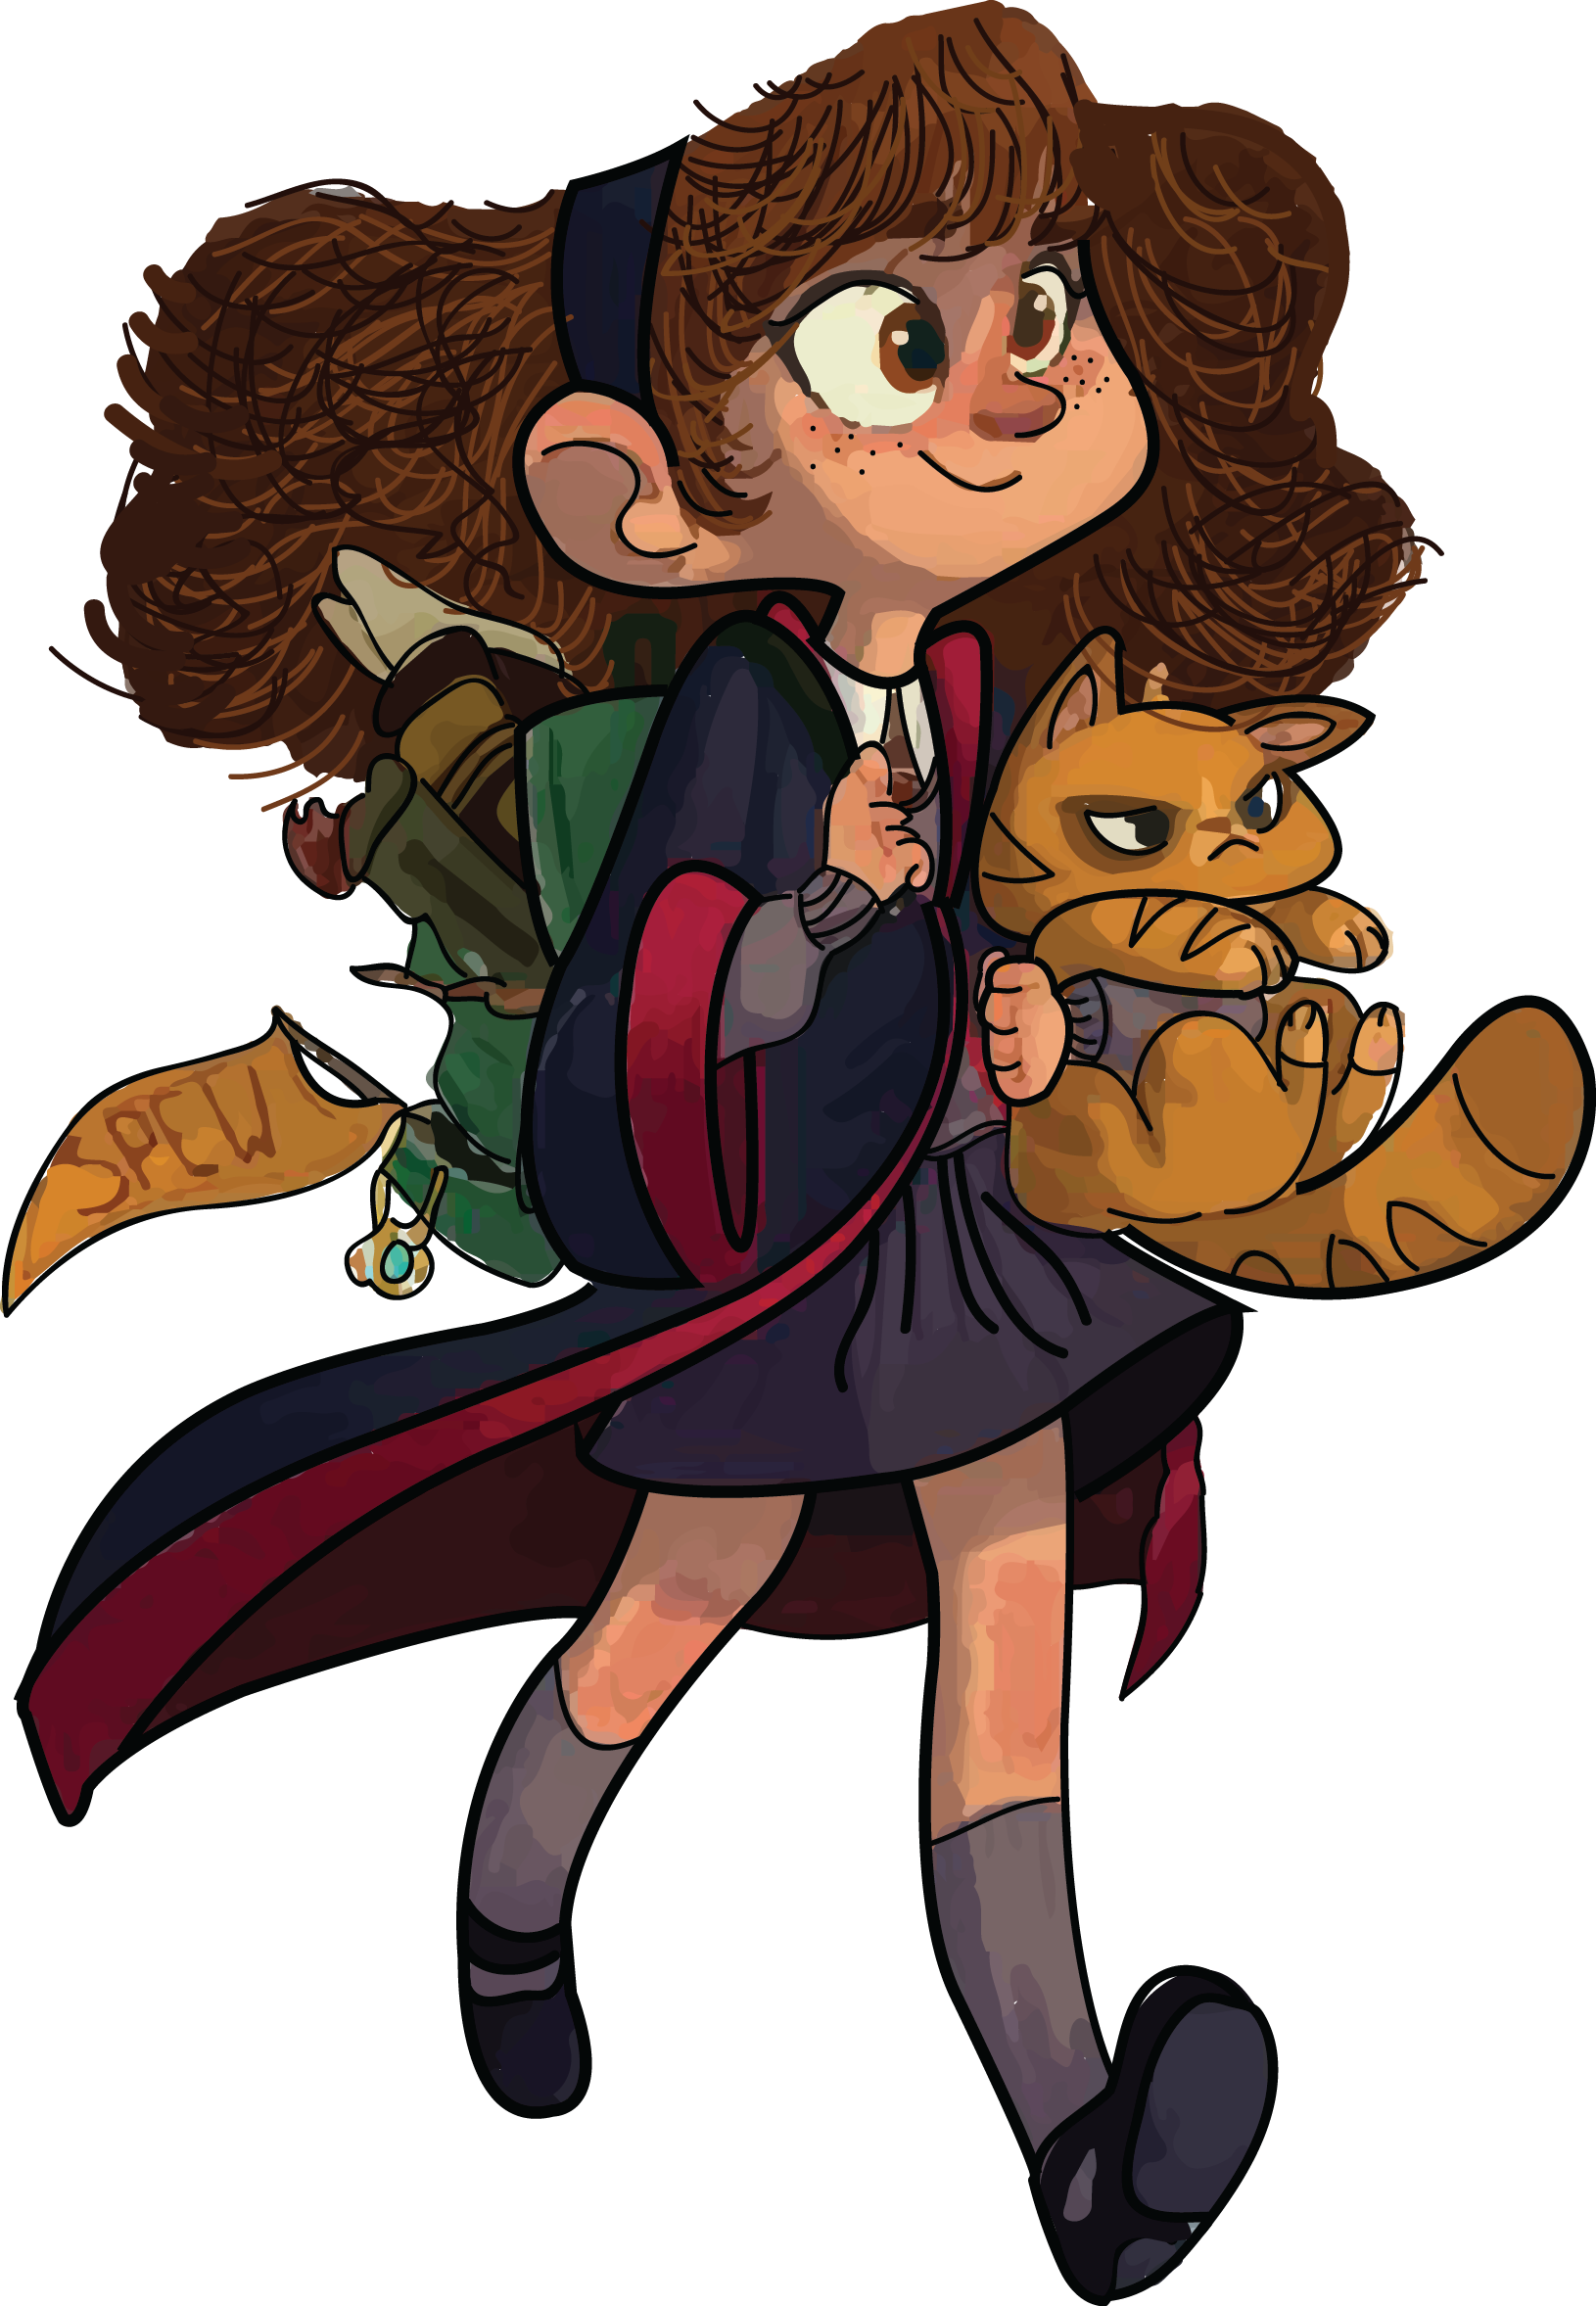 Hermione’s beloved cat, Crookshanks is a large ginger cat with a bushy tail...